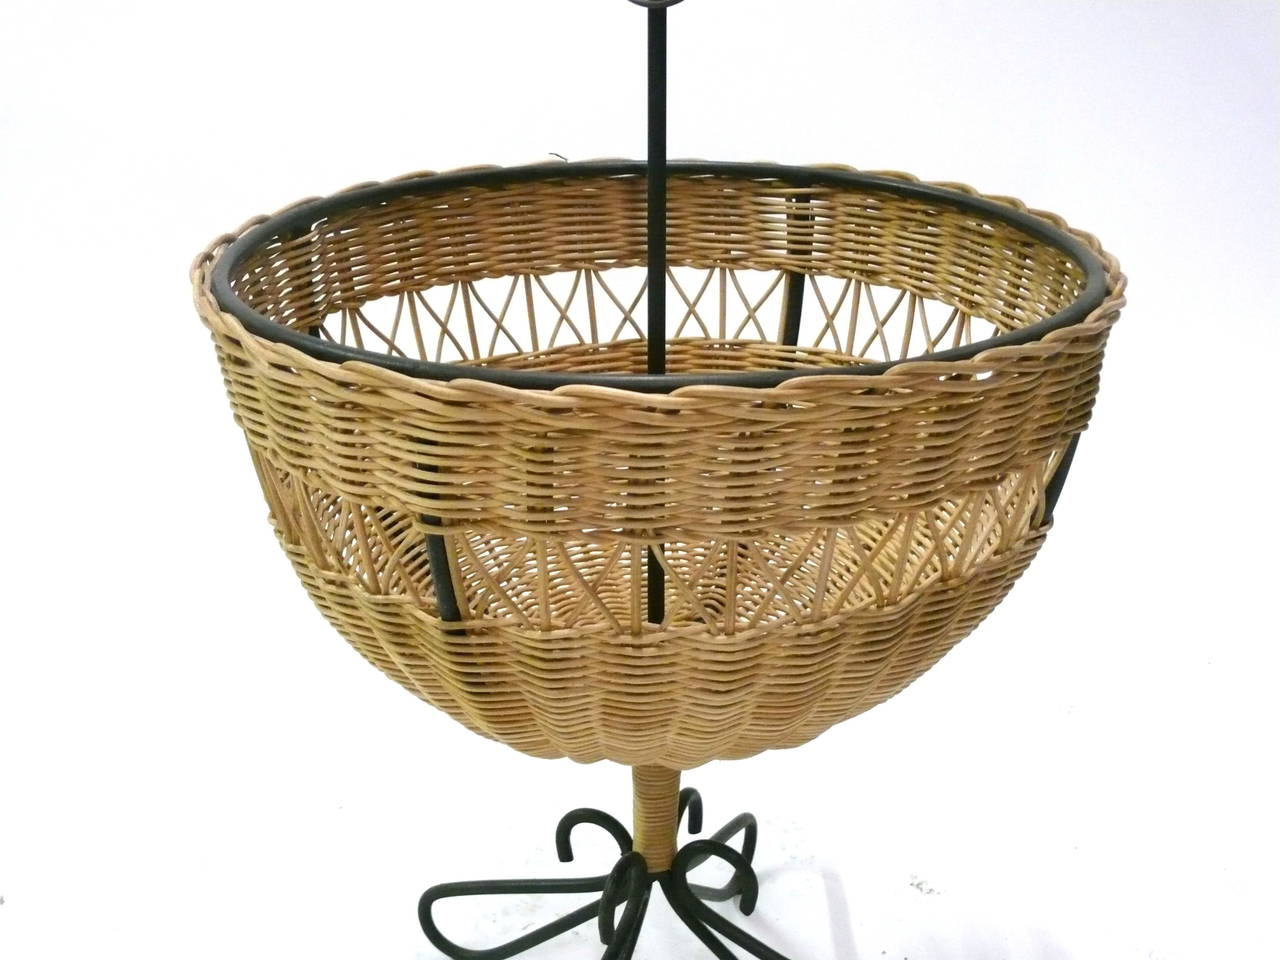 Fantastic Iron and woven wicker catch all. Wicker basket sits atop a unique metal base. Perfect, for blankets. Super functional. Excellent vintage condition.